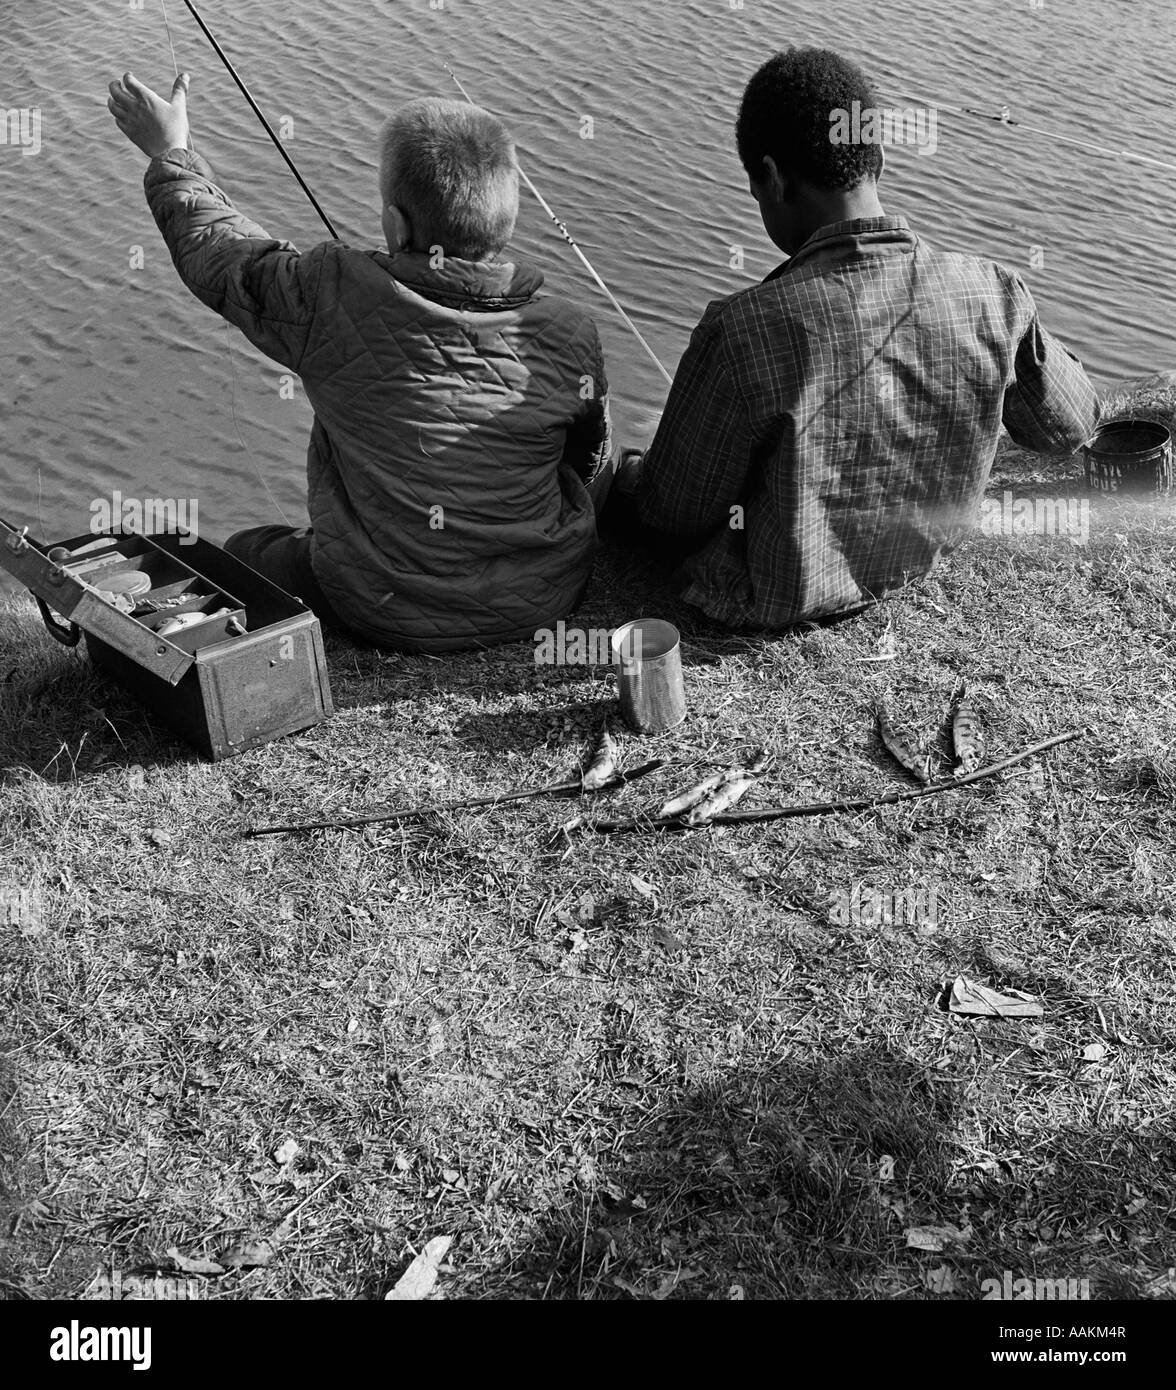 1960s BACK VIEW OF BLACK BOY AND WHITE BOY FISHING IN WATER WITH CAN OF WORMS & TACKLE BOX SHARED TOGETHER Stock Photo